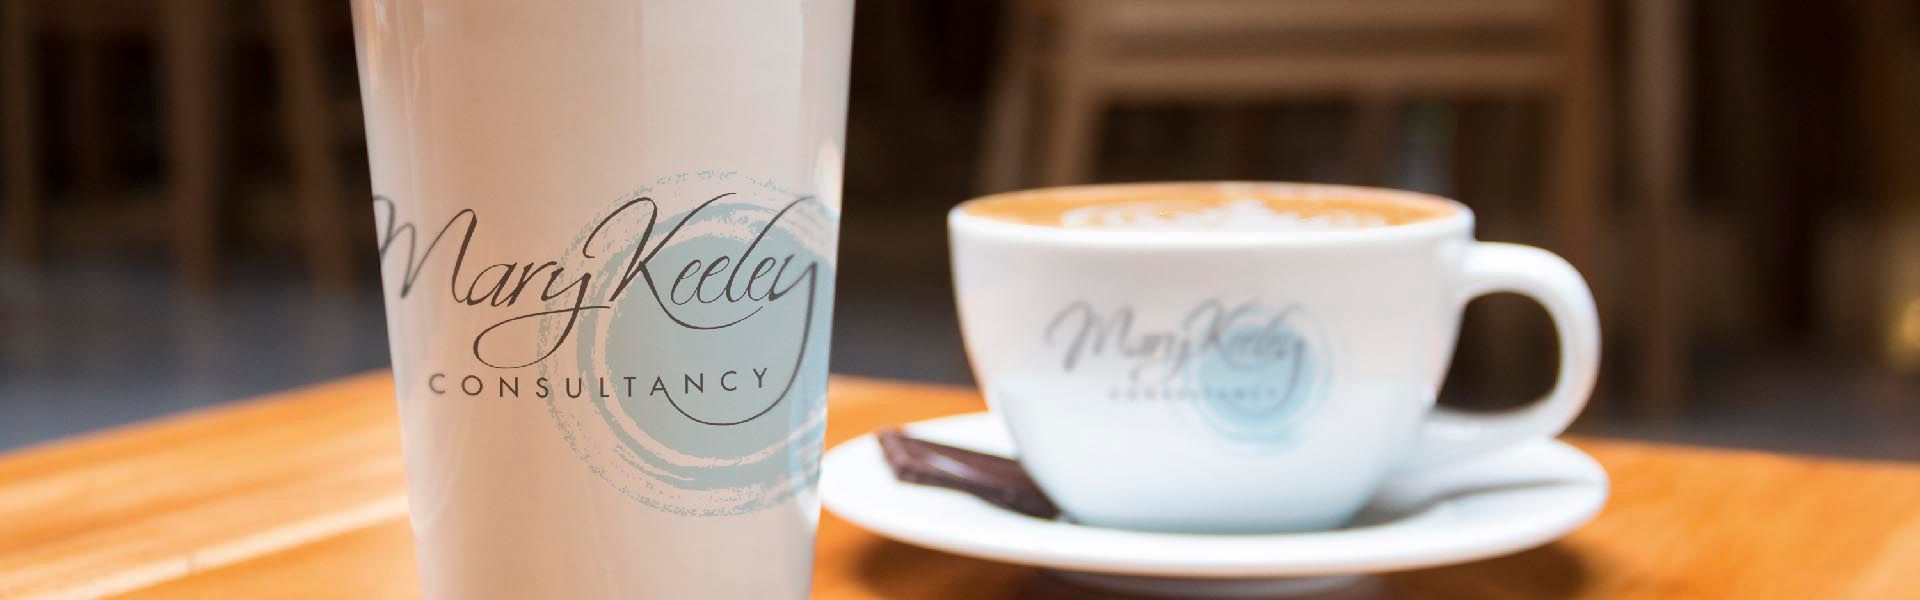 a cup that says mary keeley consultancy sits next to a cup of coffee